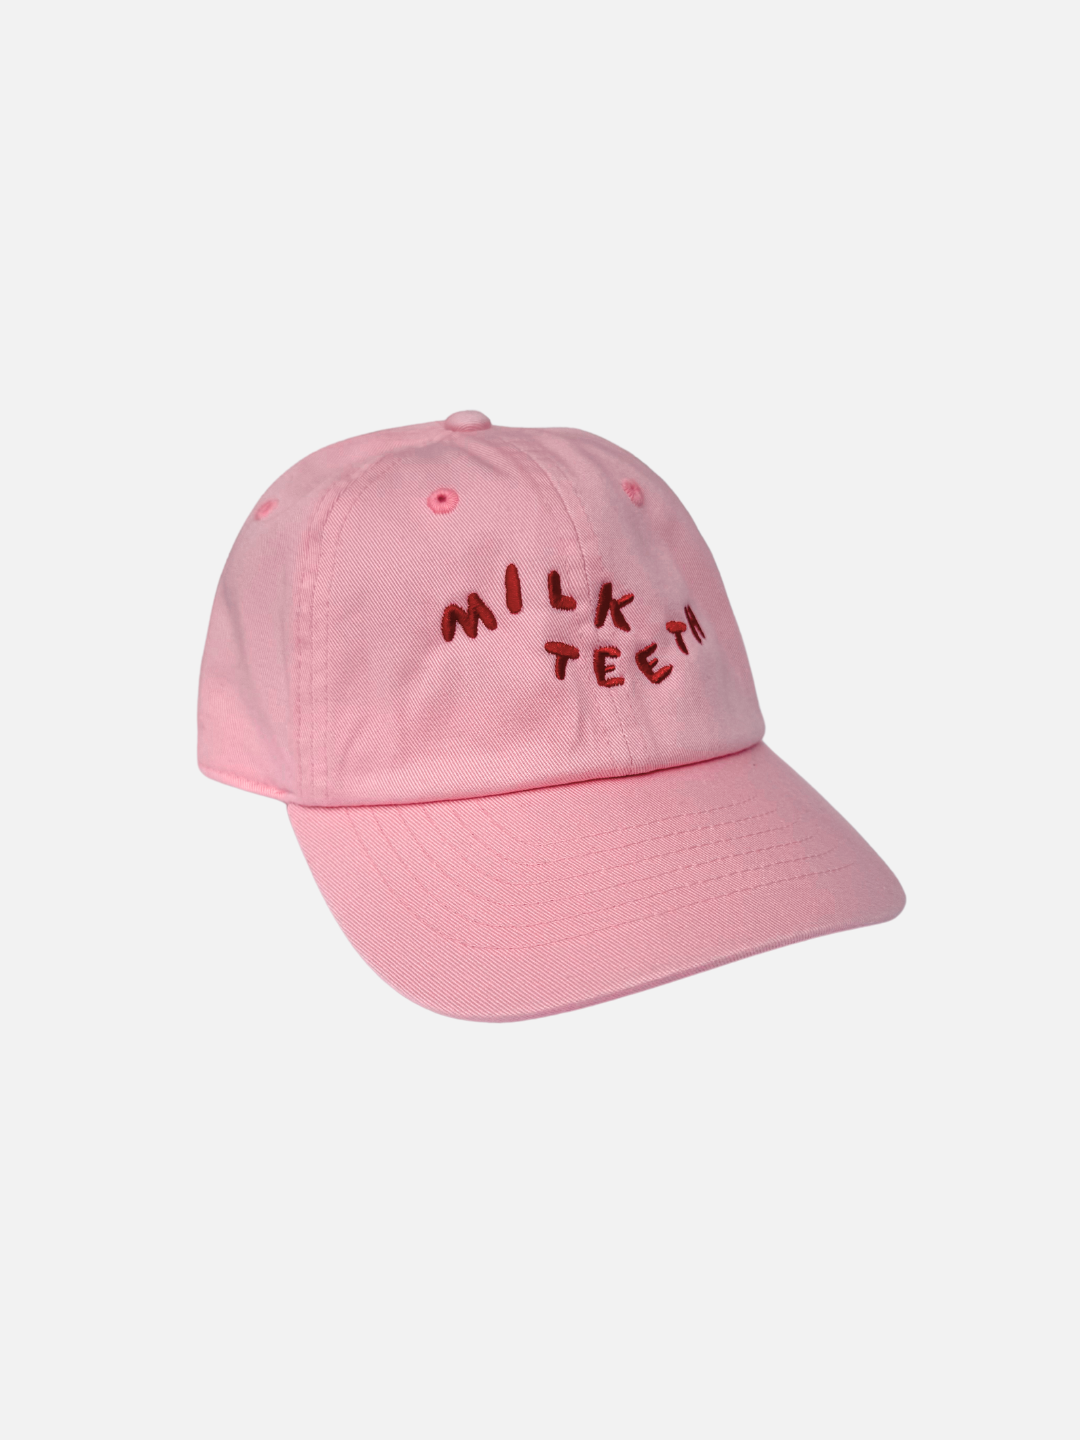 A front view of the Milk Teeth Cap with red orange embroidery